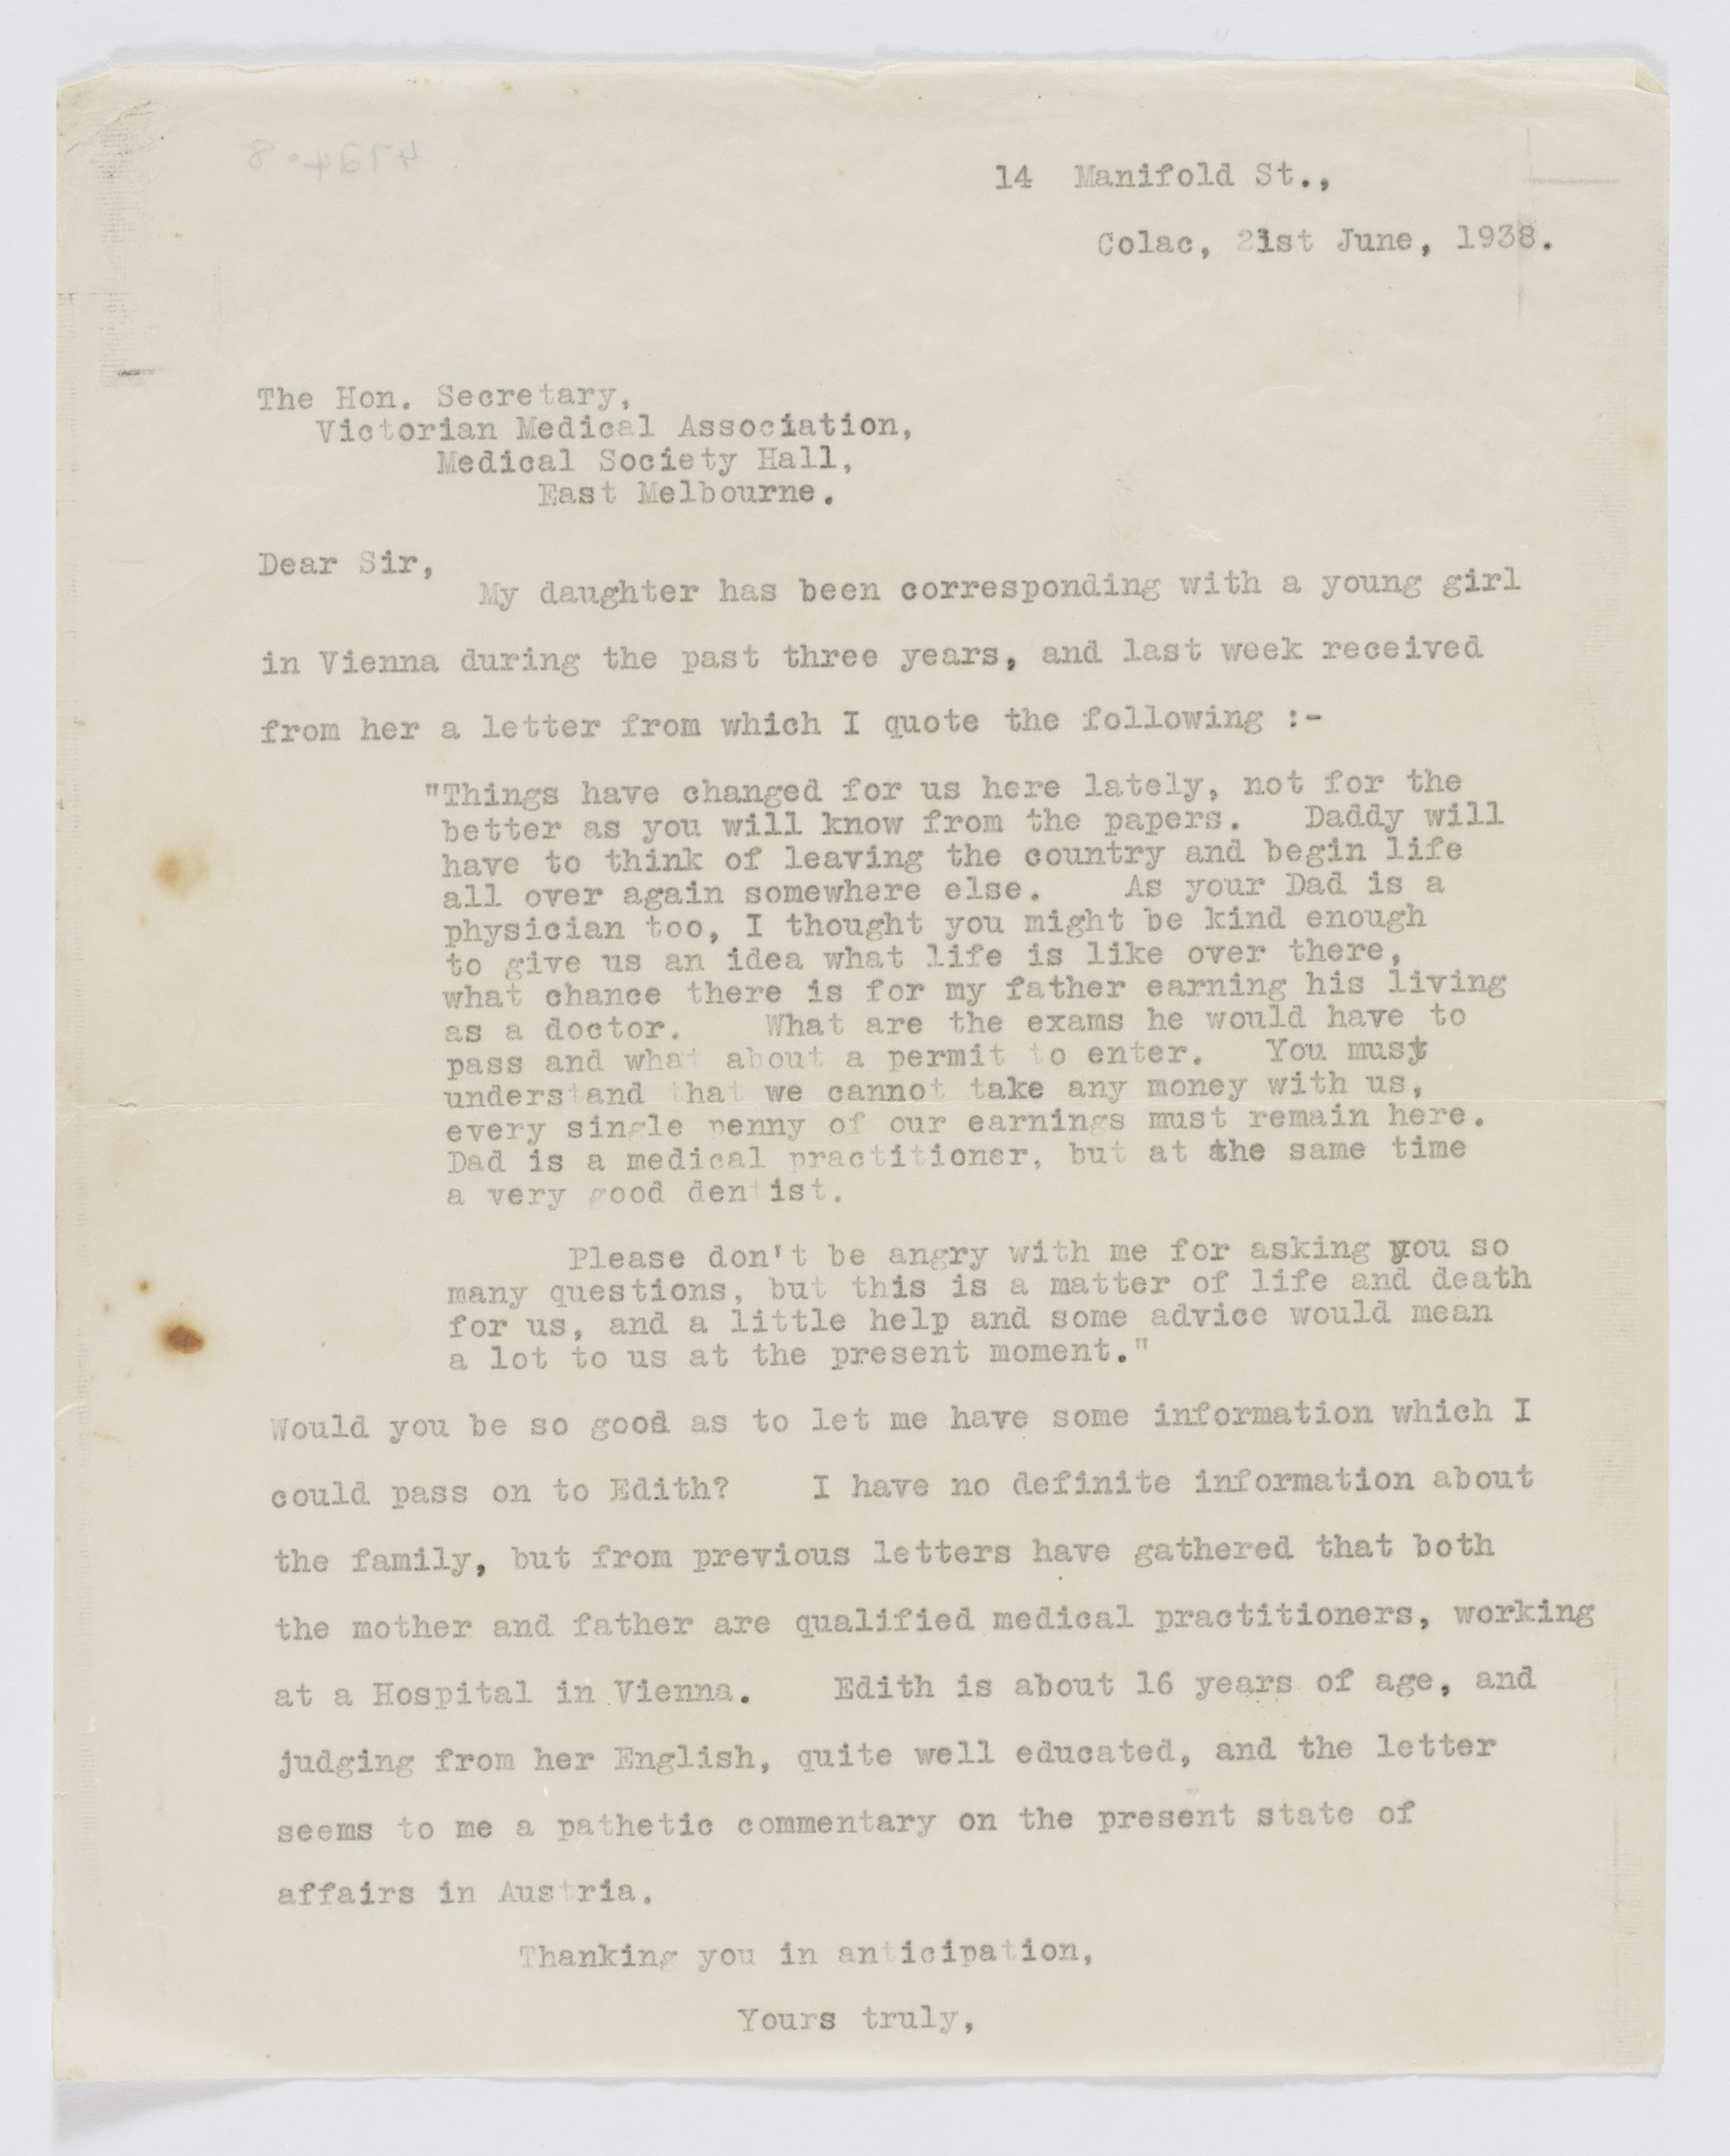 Typed letter from Keith Doig to the Victorian Medical Society, 21 June 1938